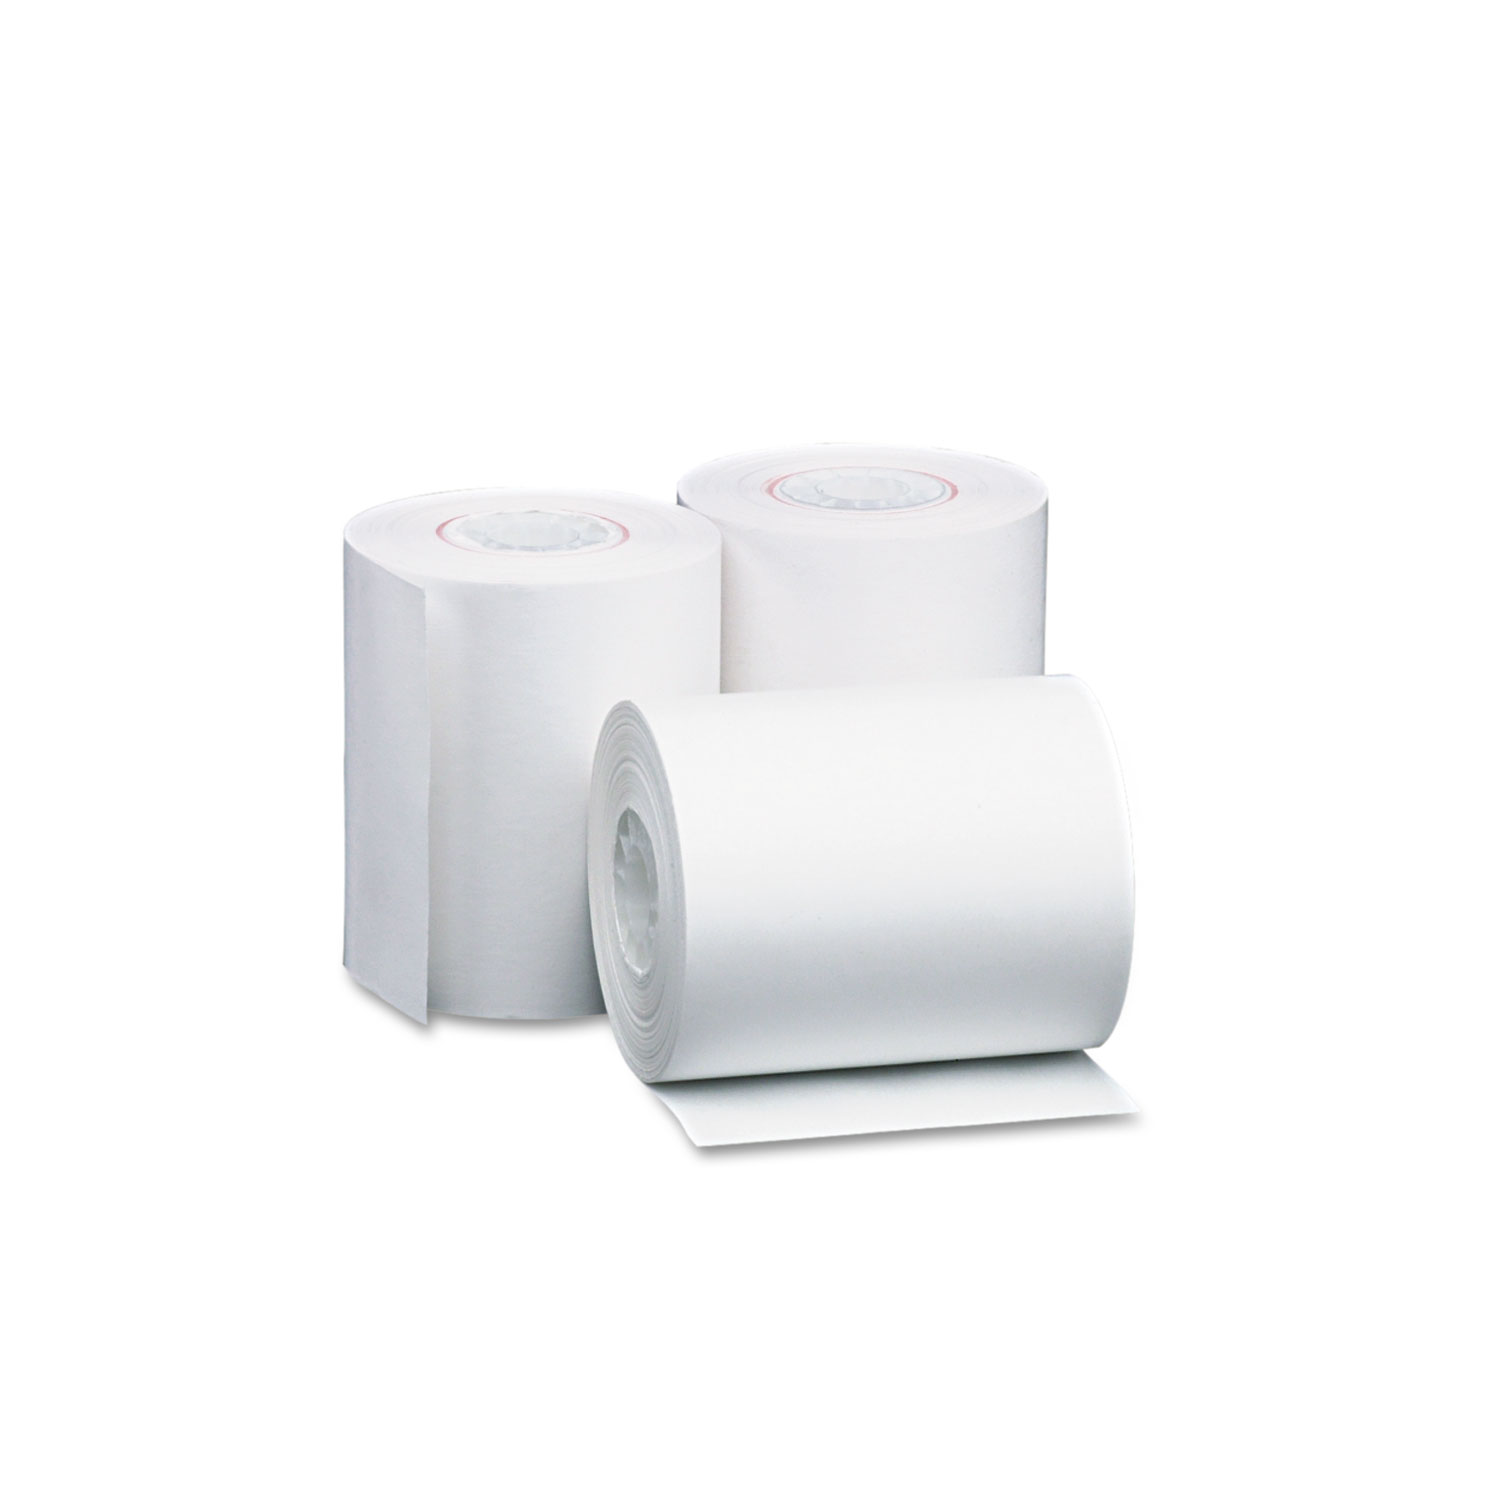  Iconex PMC05227 Direct Thermal Printing Thermal Paper Rolls, 4.38 x 127 ft, White, 50/Carton (ICX90782987) 